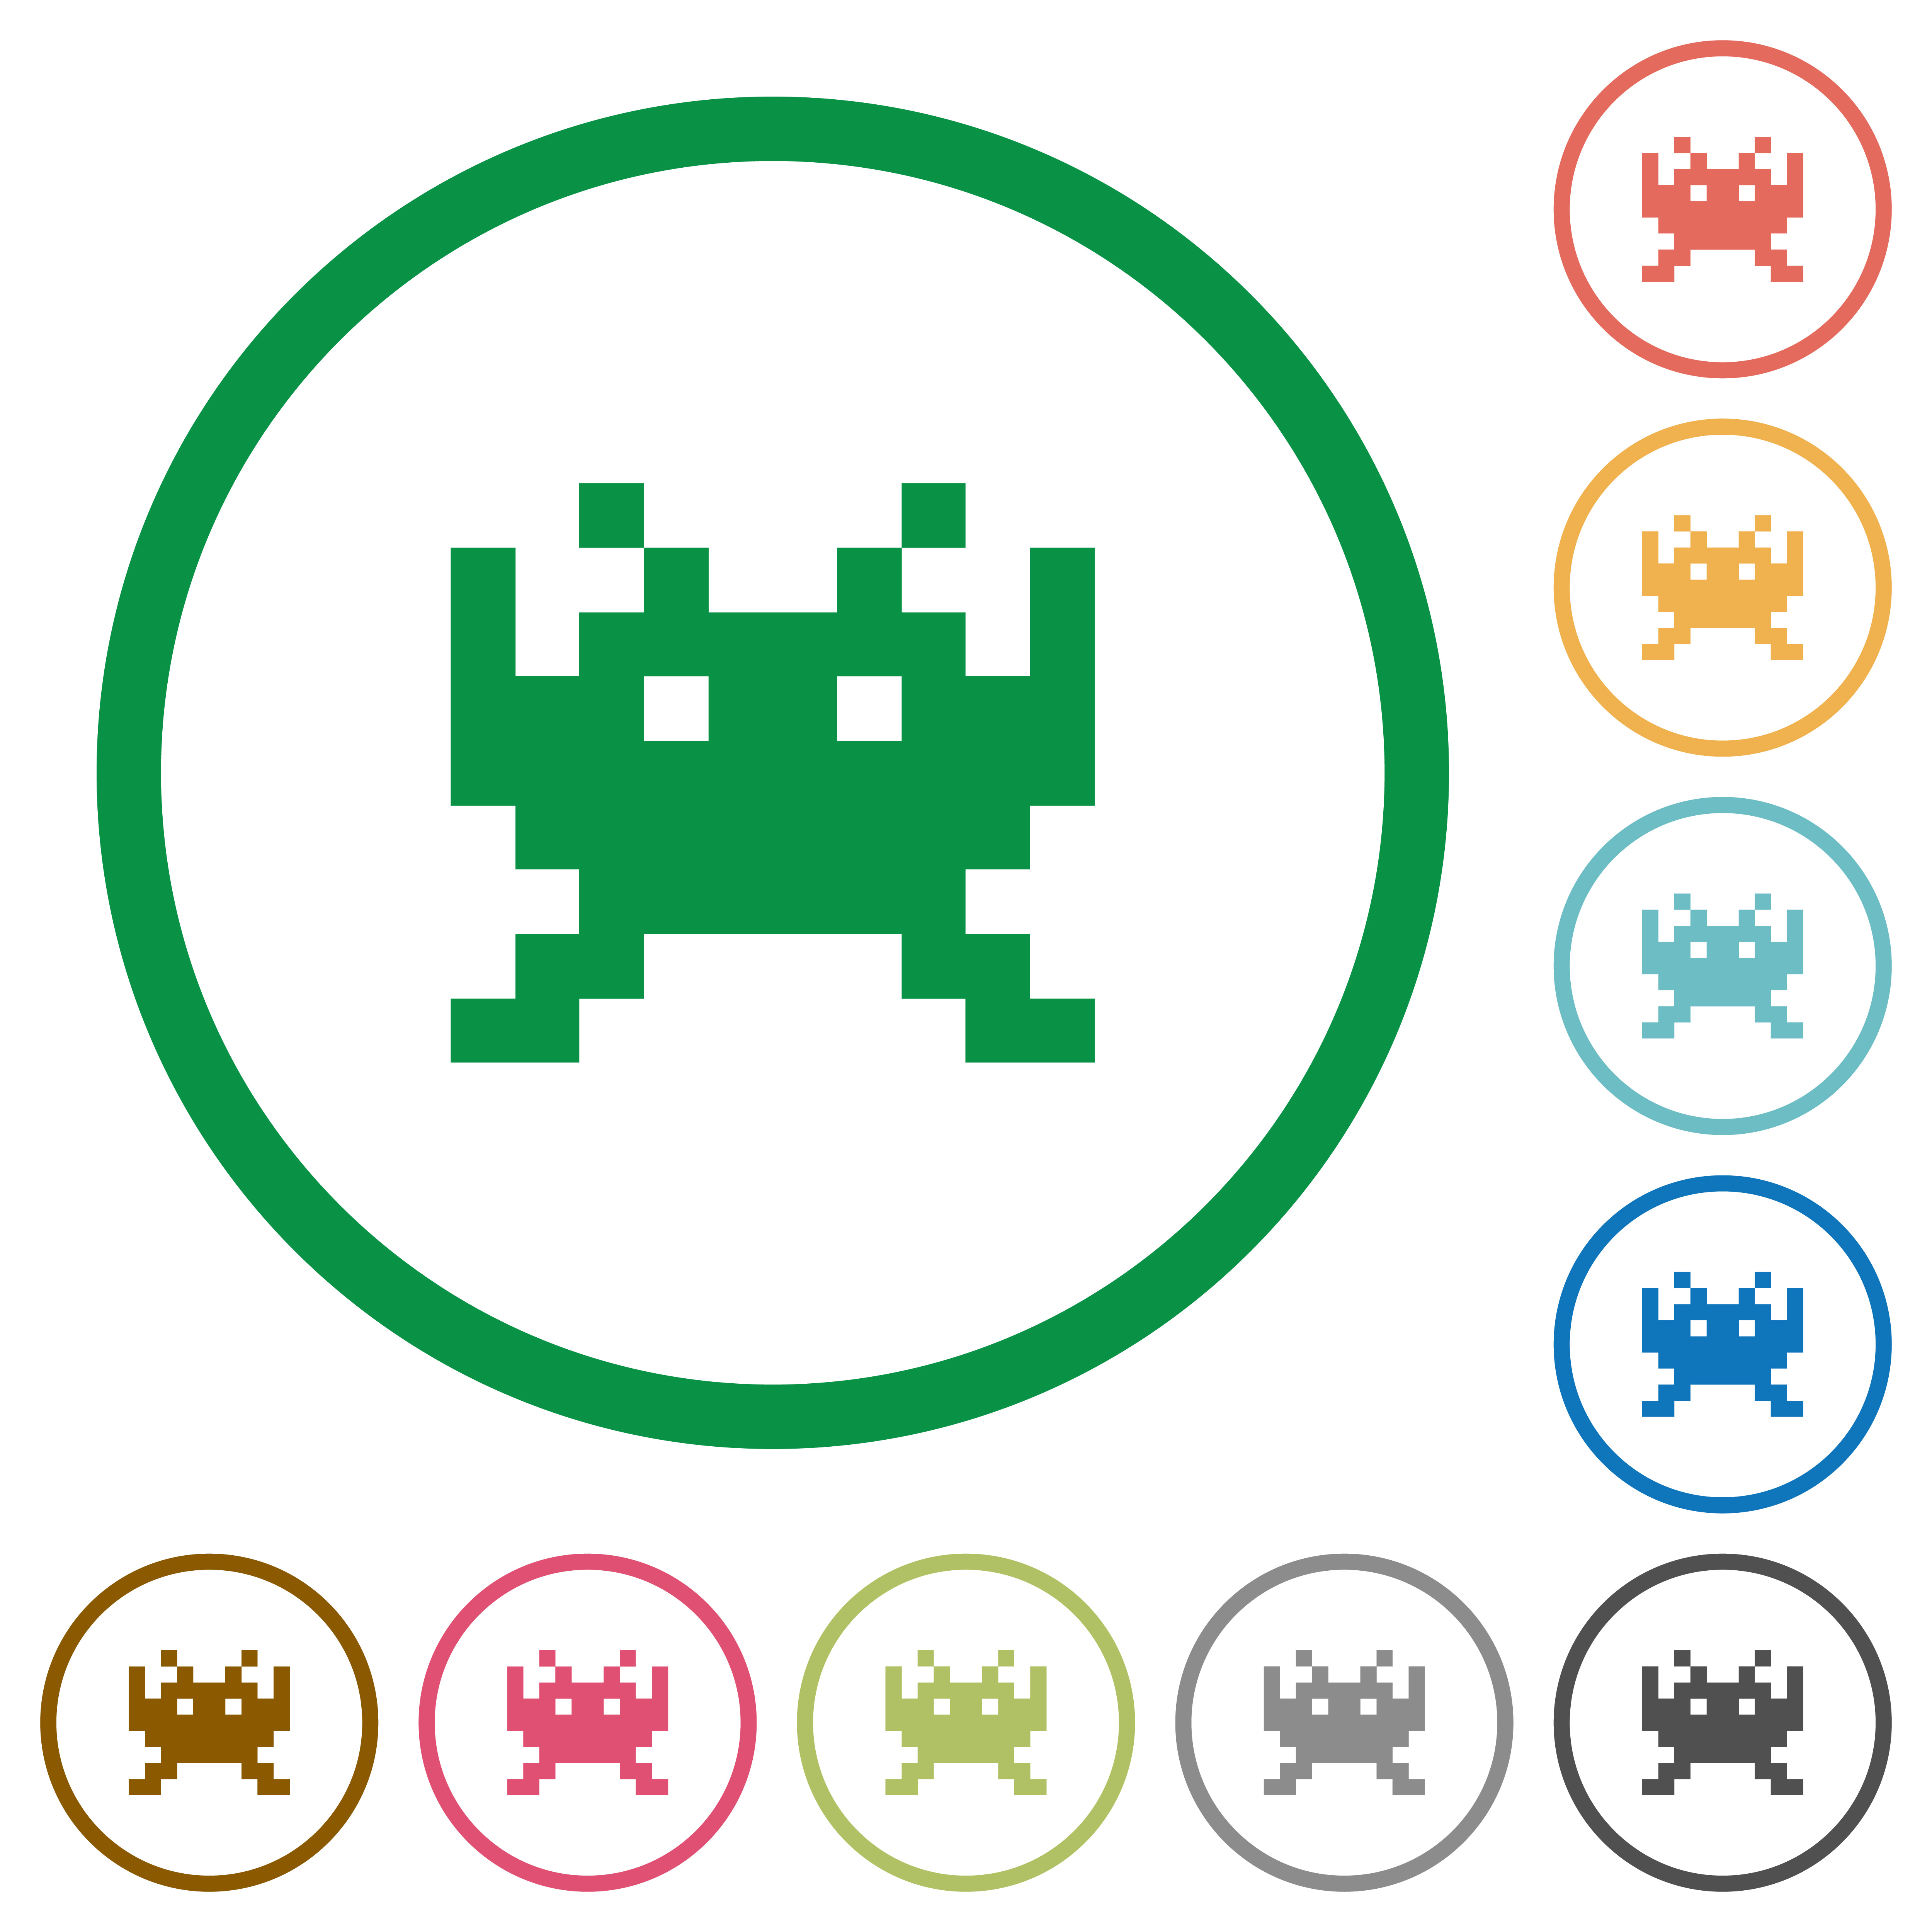 Video game flat icons with outlines